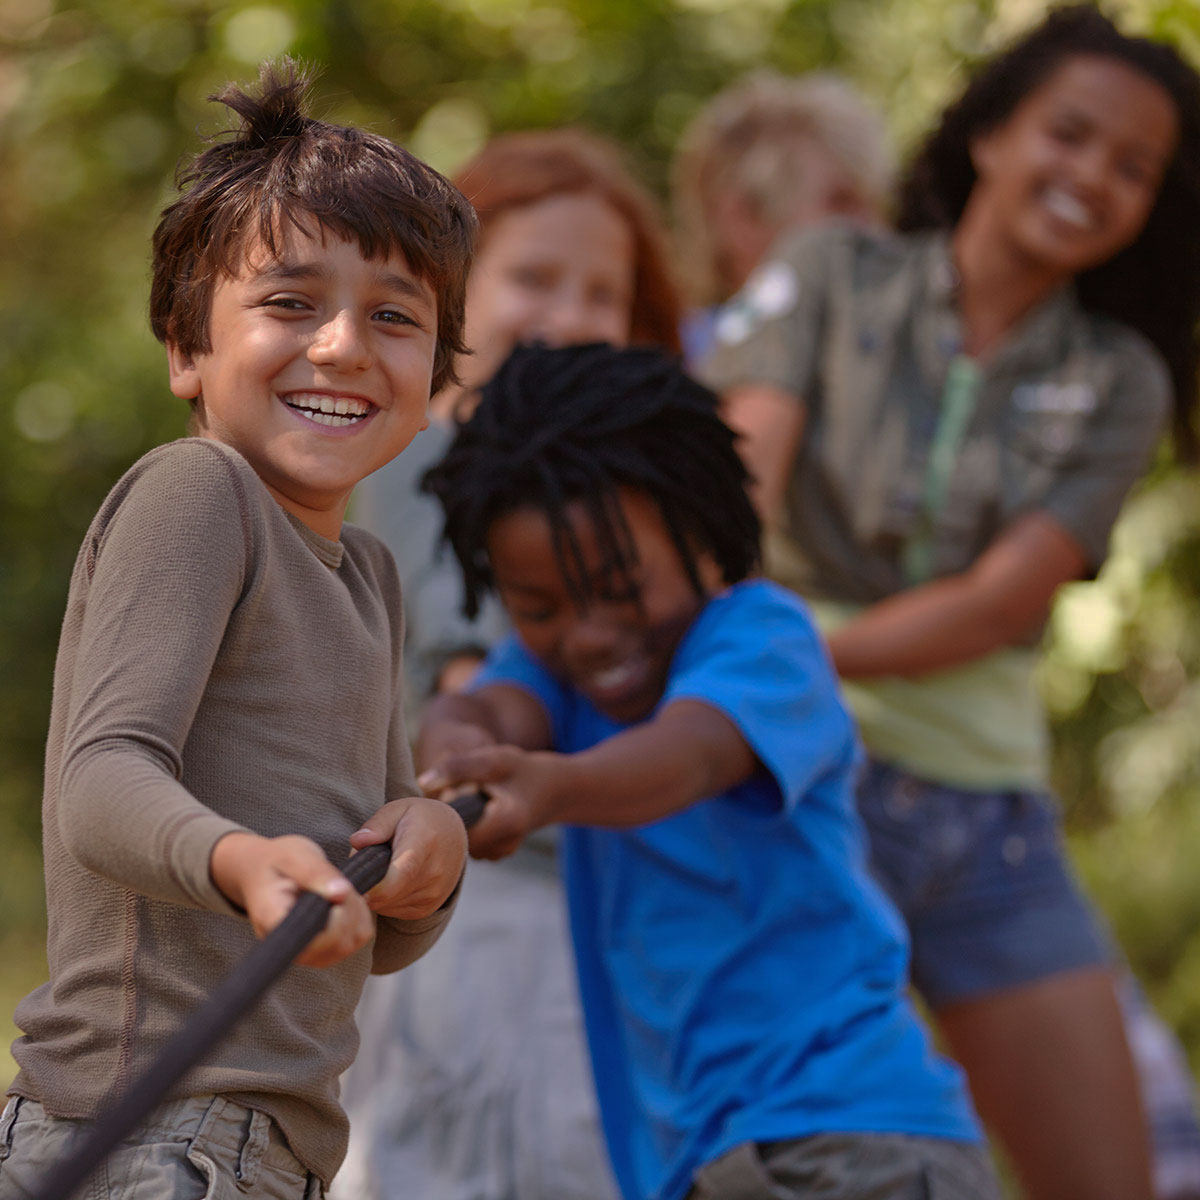 Sports and Camp Physicals for your Child in Palos Verdes